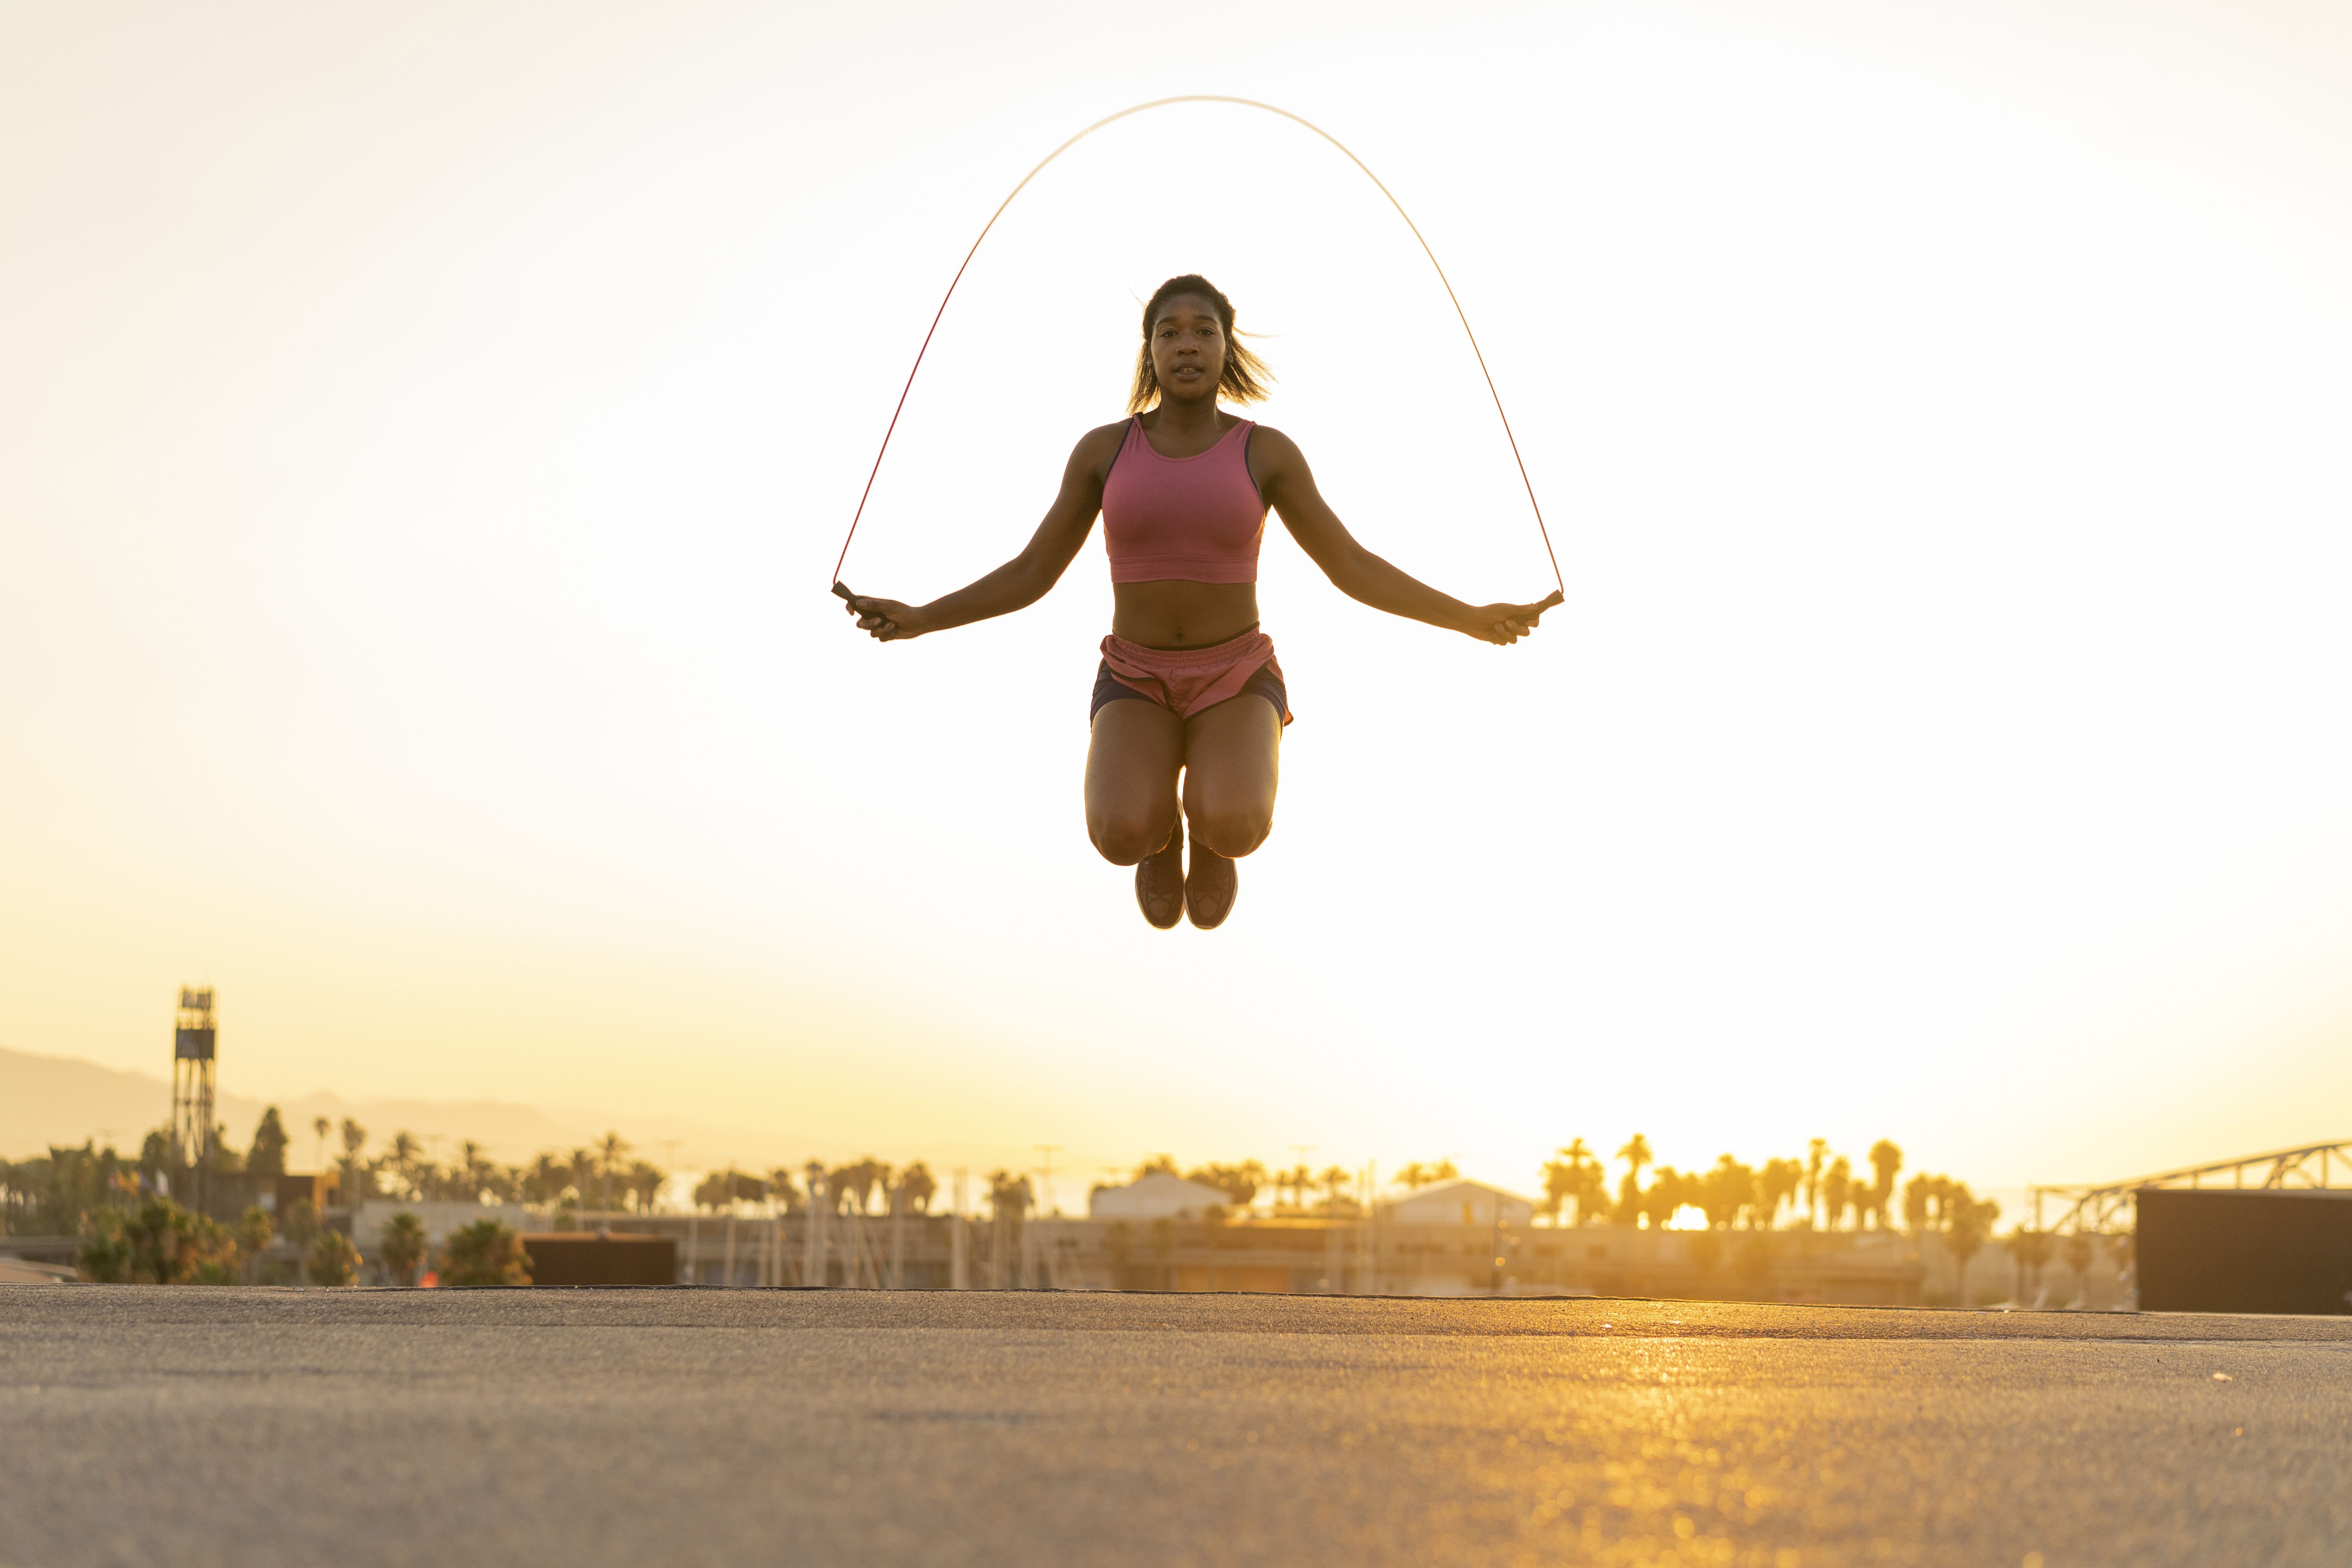 https://hips.hearstapps.com/hmg-prod/images/spain-barcelona-young-black-woman-skipping-rope-at-royalty-free-image-1680012812.jpg